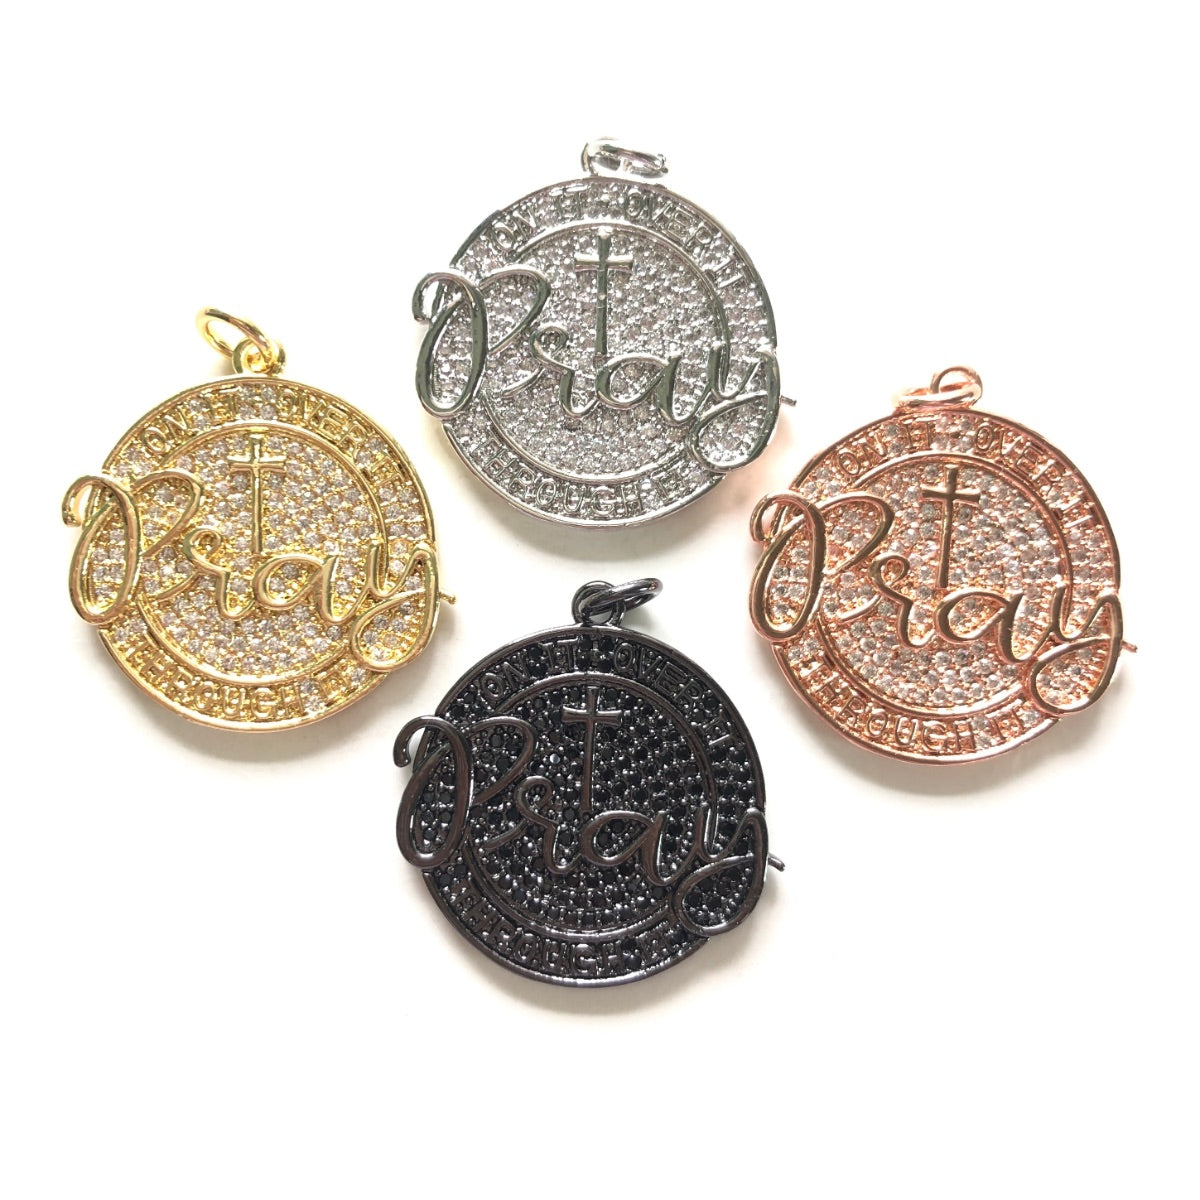 10pcs/lot 28mm CZ Pave Round Plate PRAY ON IT OVER IT THROUGH IT Quote Charms CZ Paved Charms Christian Quotes Discs On Sale Charms Beads Beyond